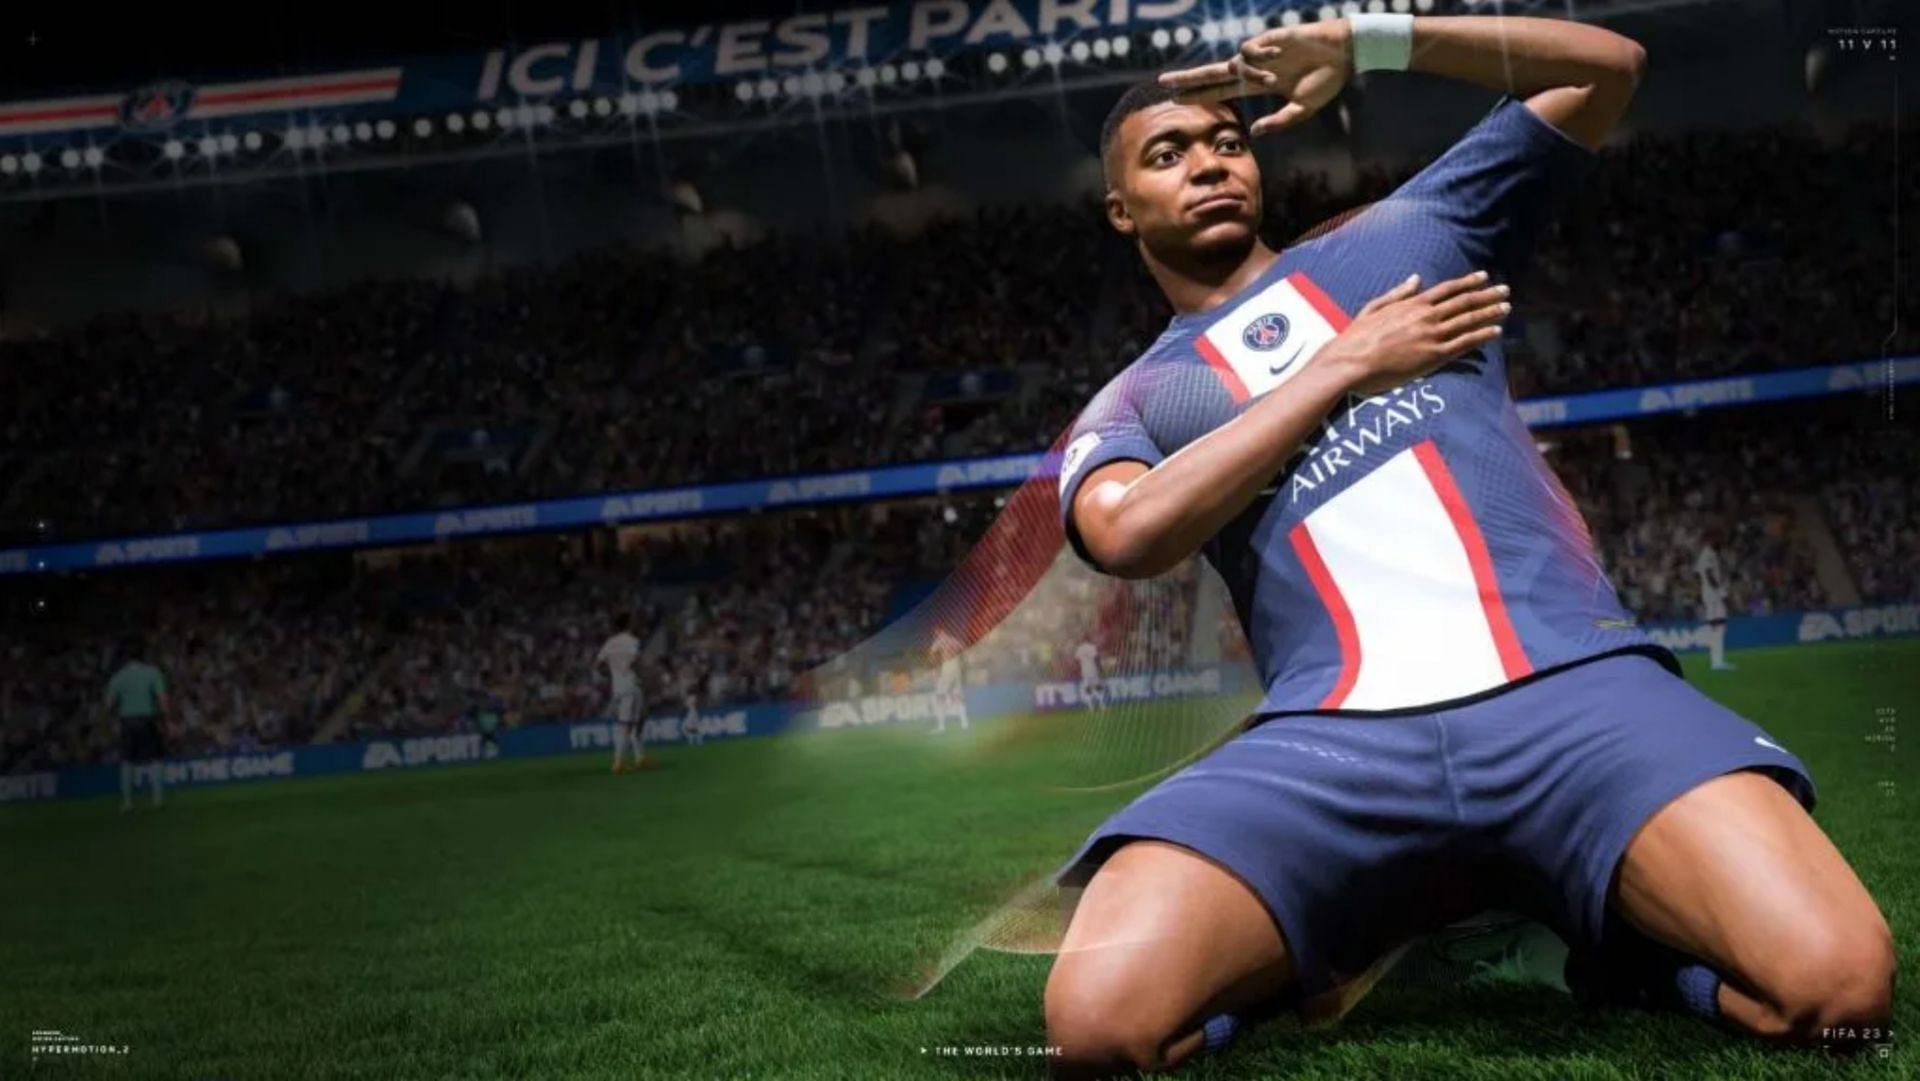 The Quick sell recovery can allow players to restore accidental sale of cards like Mbappe (Image via EA Sports)